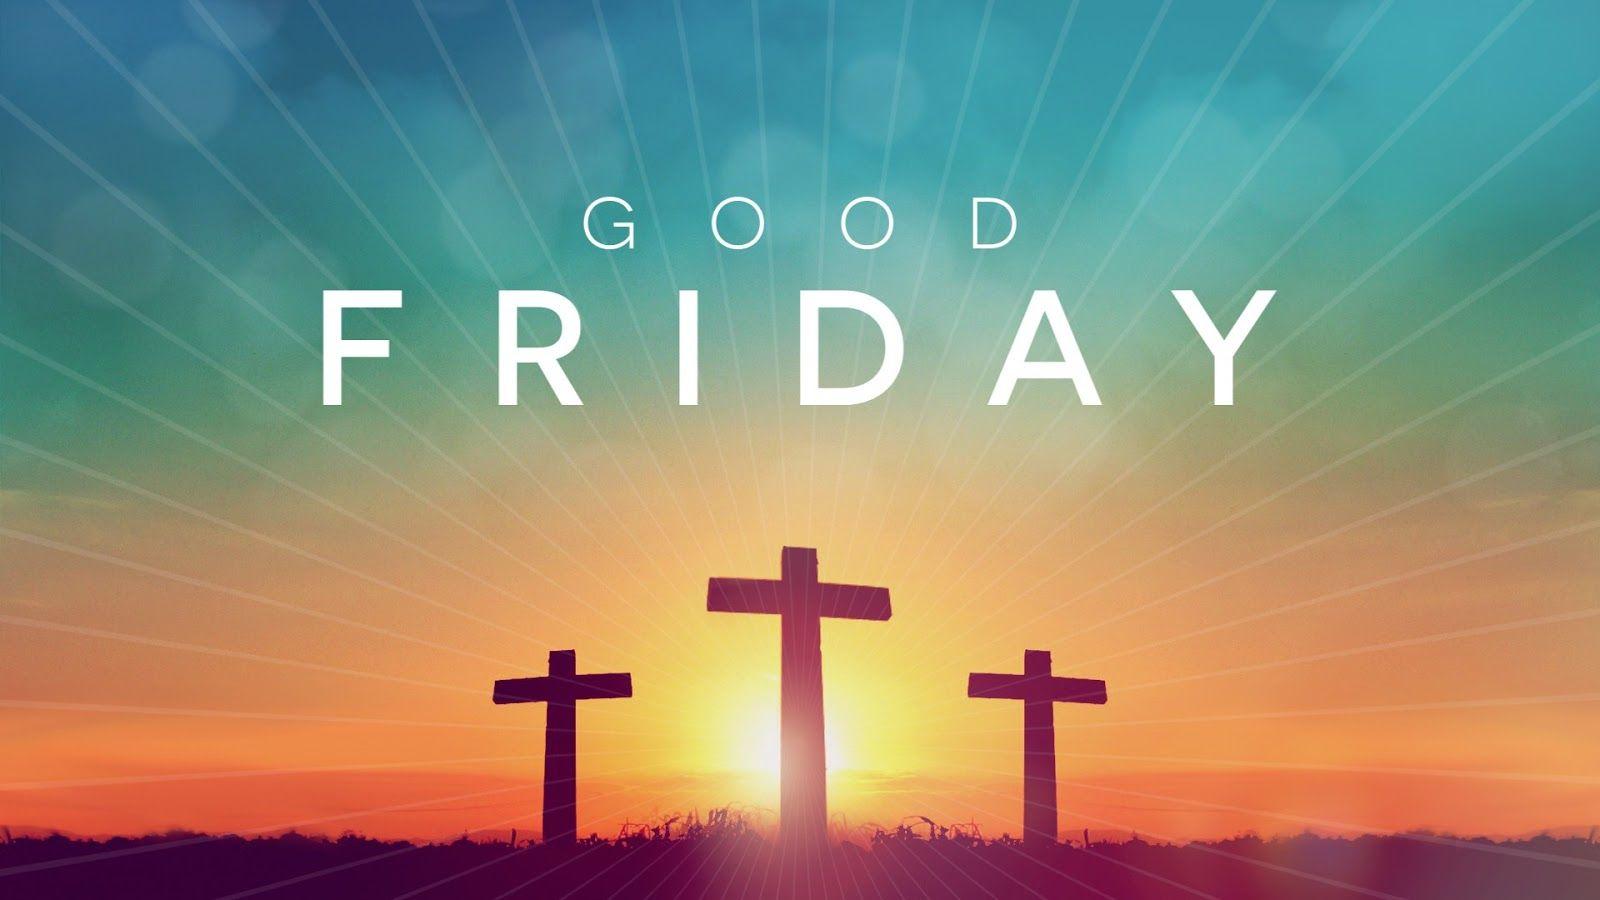 Good Friday Wallpapers - Top Free Good Friday Backgrounds ...